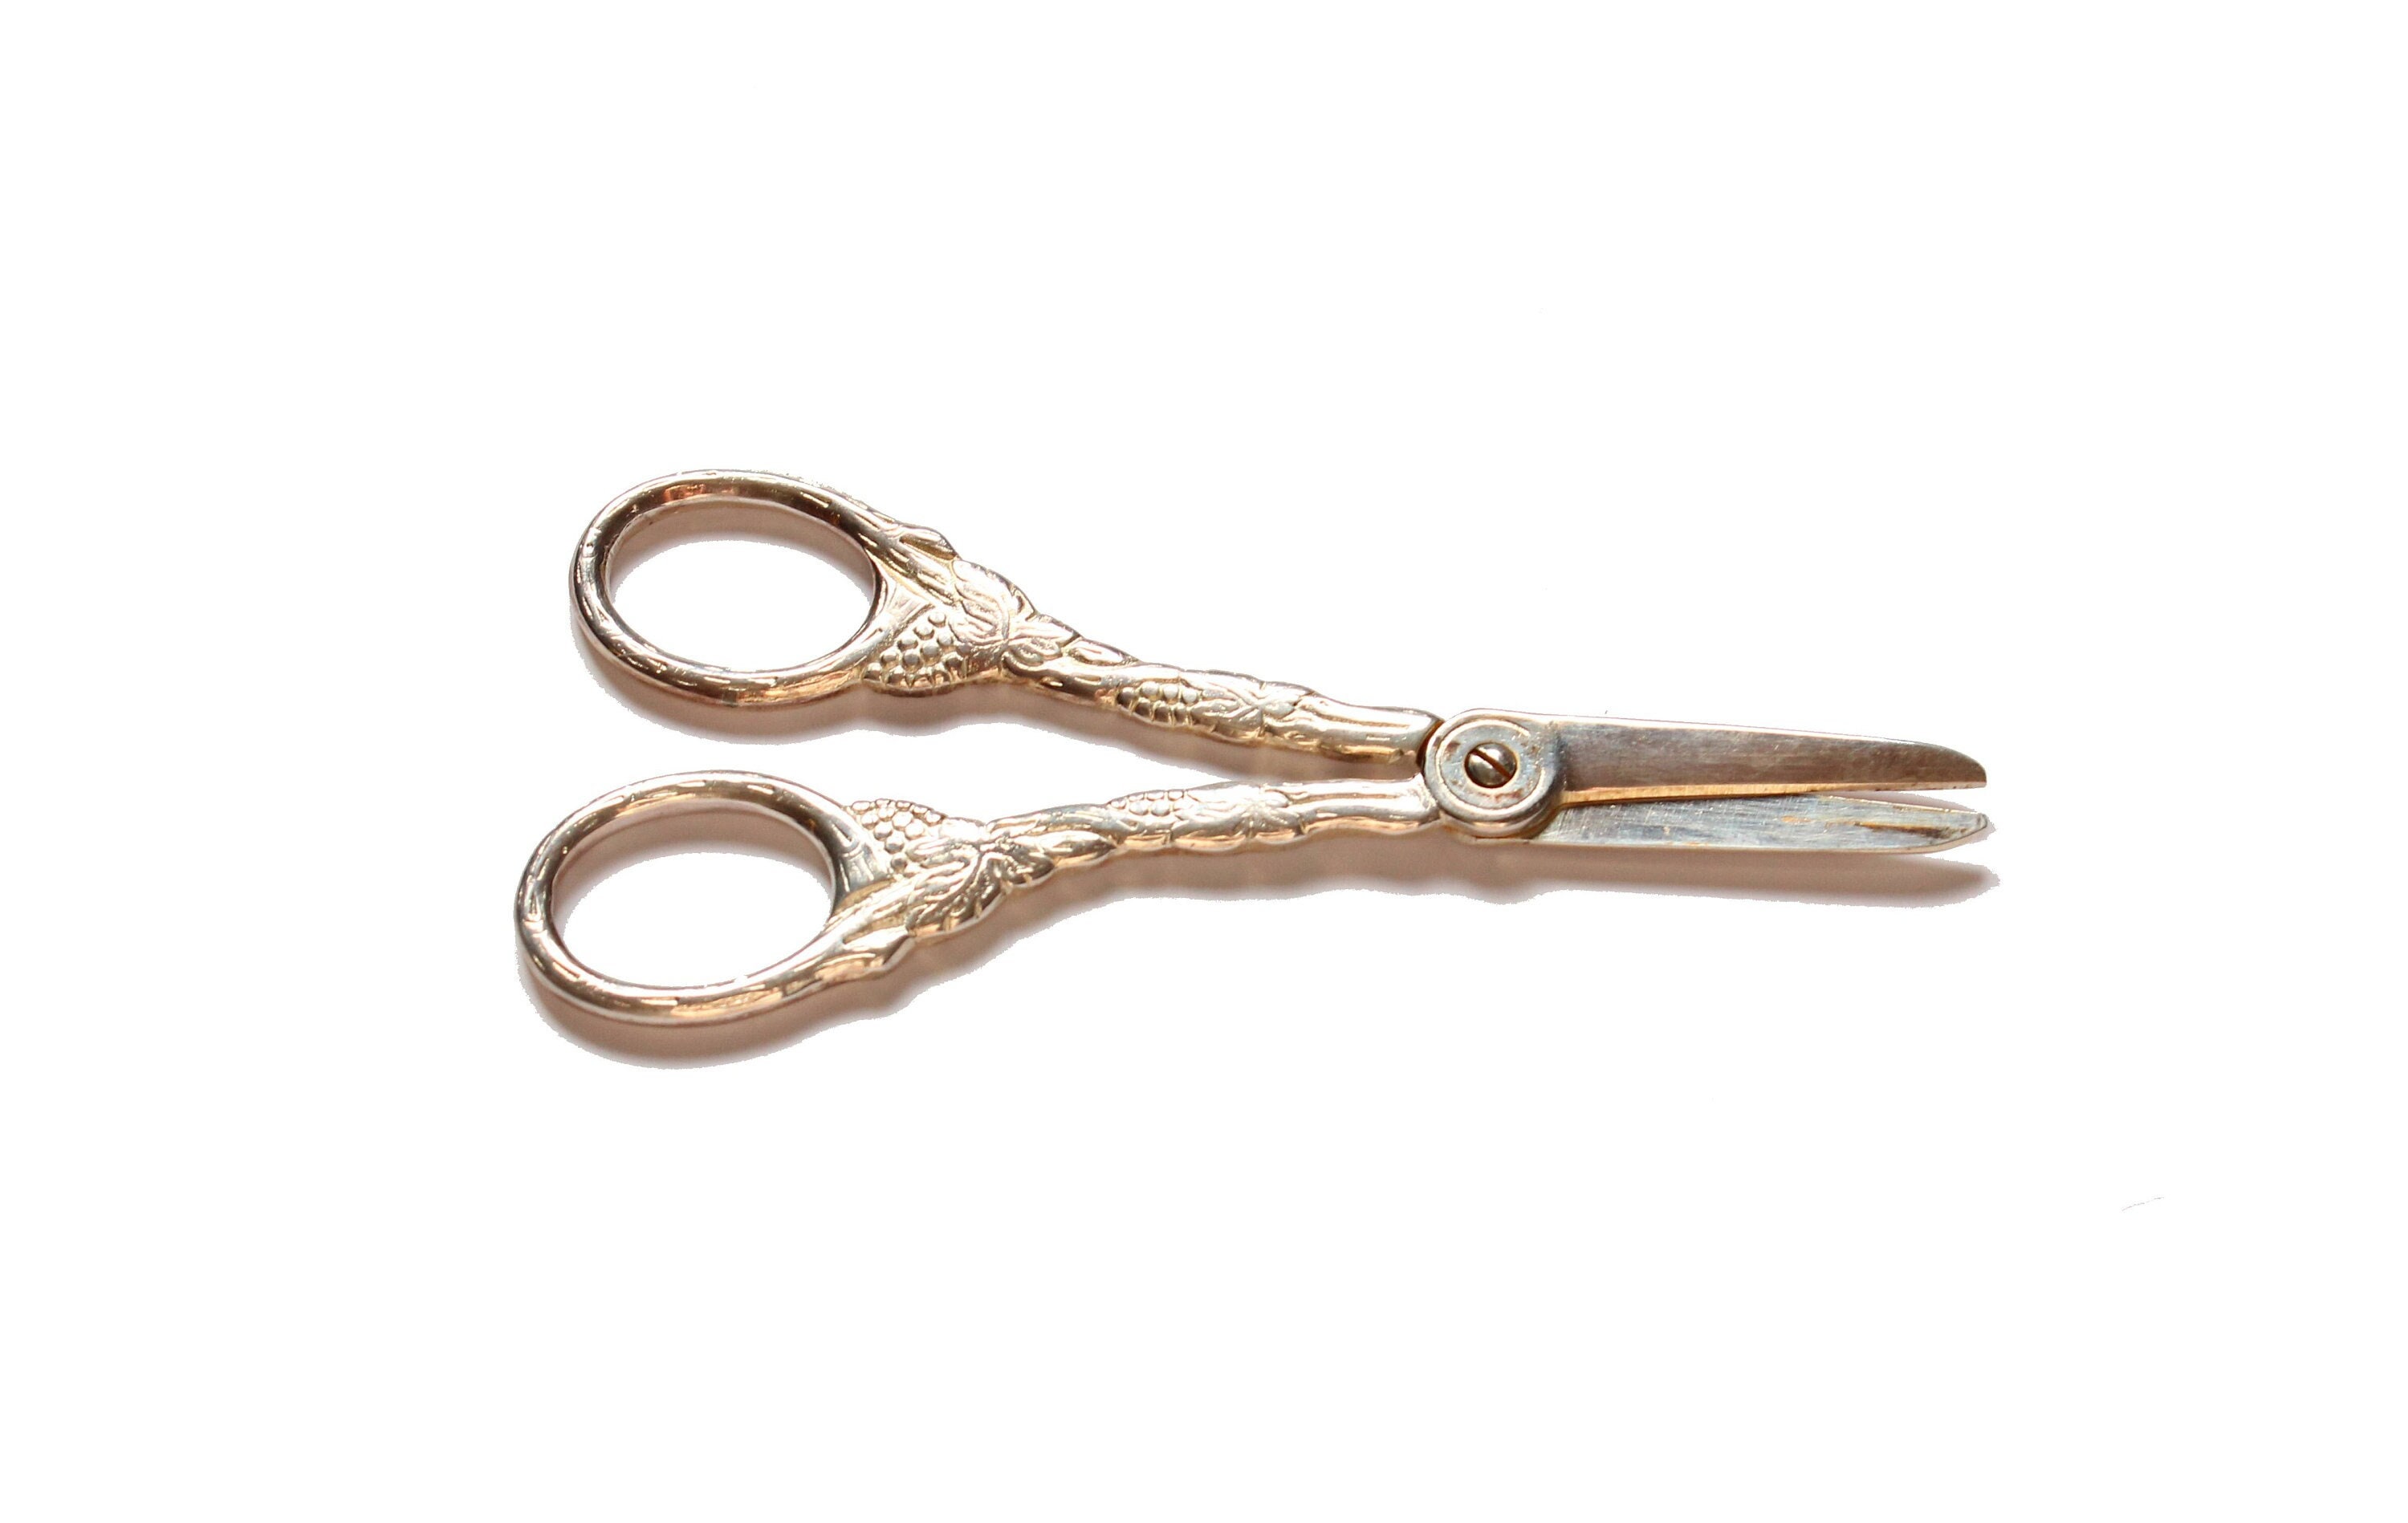 Vintage Decorative Scissors for Home Decor or Photography Flat